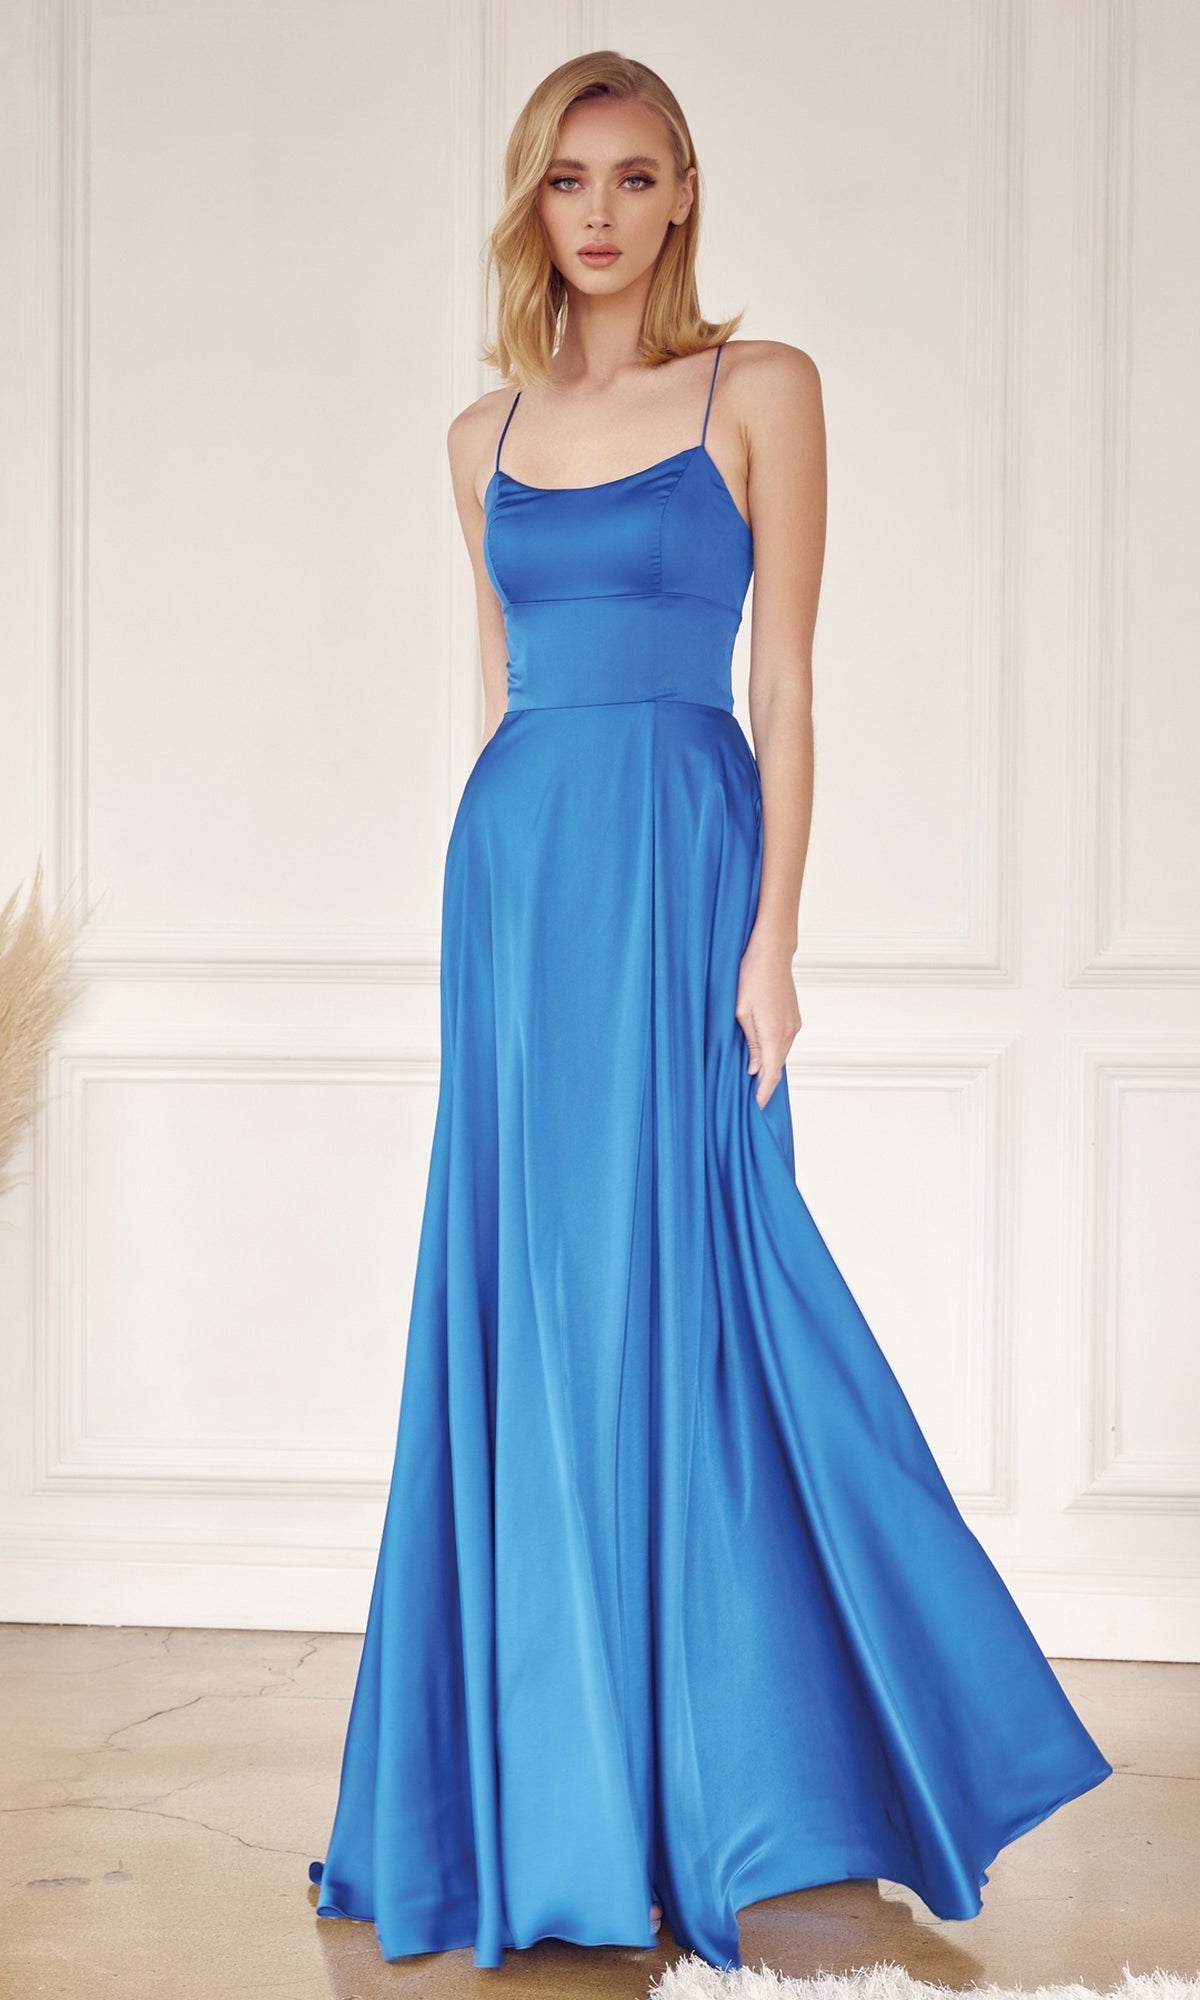 Strappy-Back Simple Long A-Line Prom Dress 278